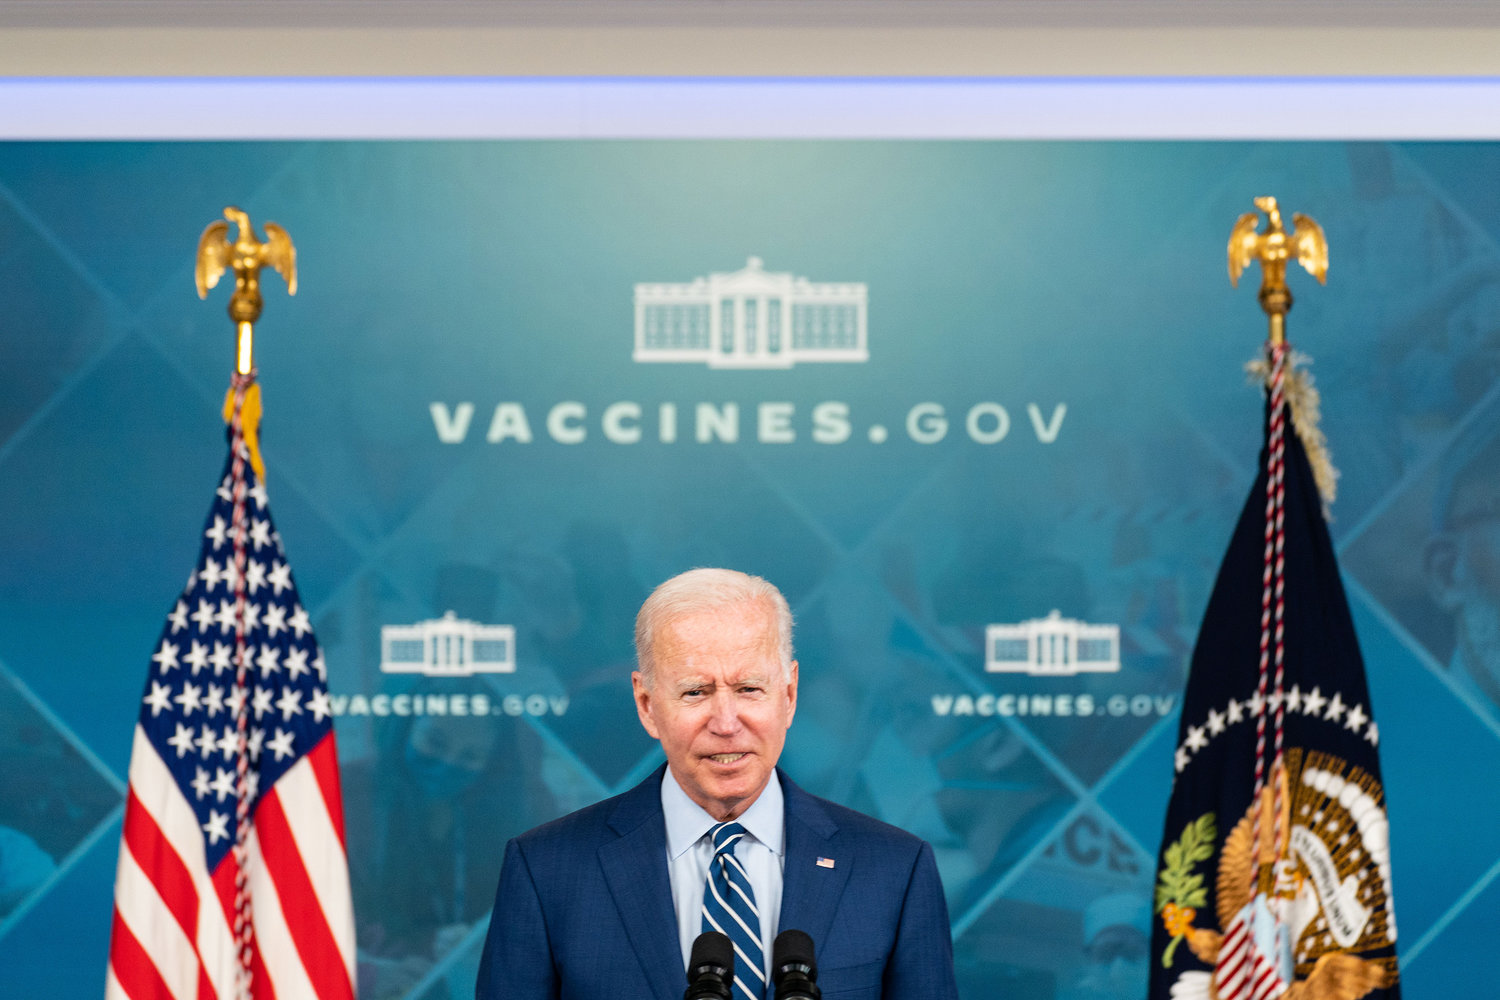 President Joe Biden speaks before receiving a booster vaccination shot for COVID-19 in the South Court Auditorium of the Eisenhower Executive Office Building on the White House Complex on Monday, Sept. 27, 2021, in Washington, D.C. (Kent Nishimura/Los Angeles Times/TNS)